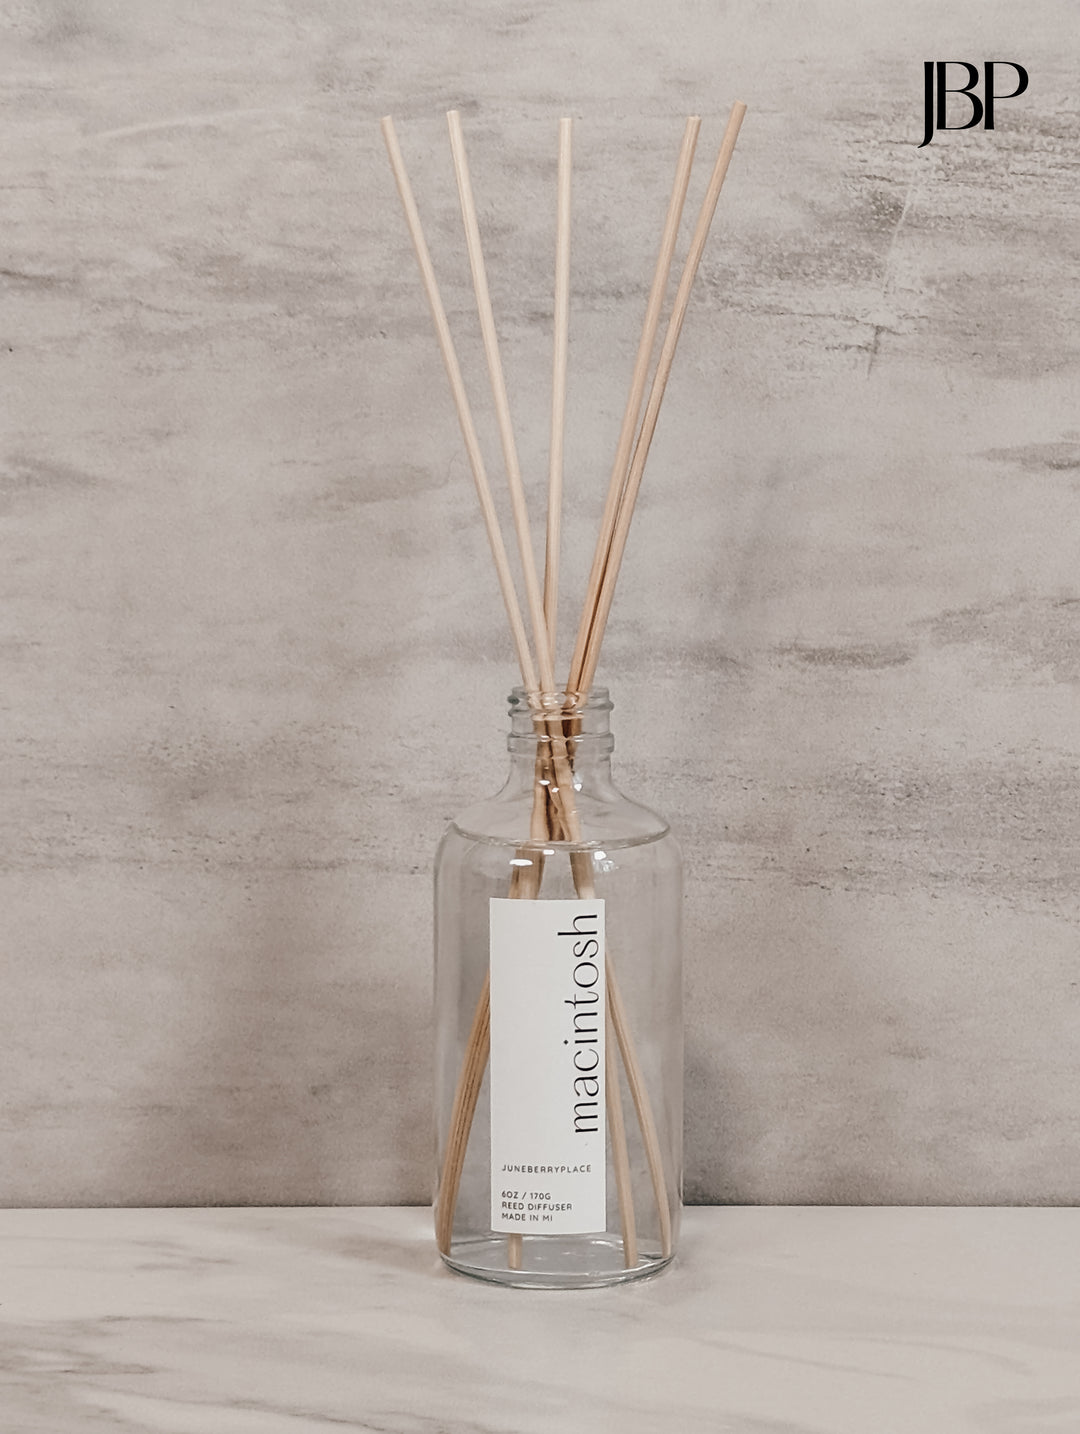 Macintosh Reed Diffuser in a glass bottle, Fall Collection by juneberryplace home fragrances